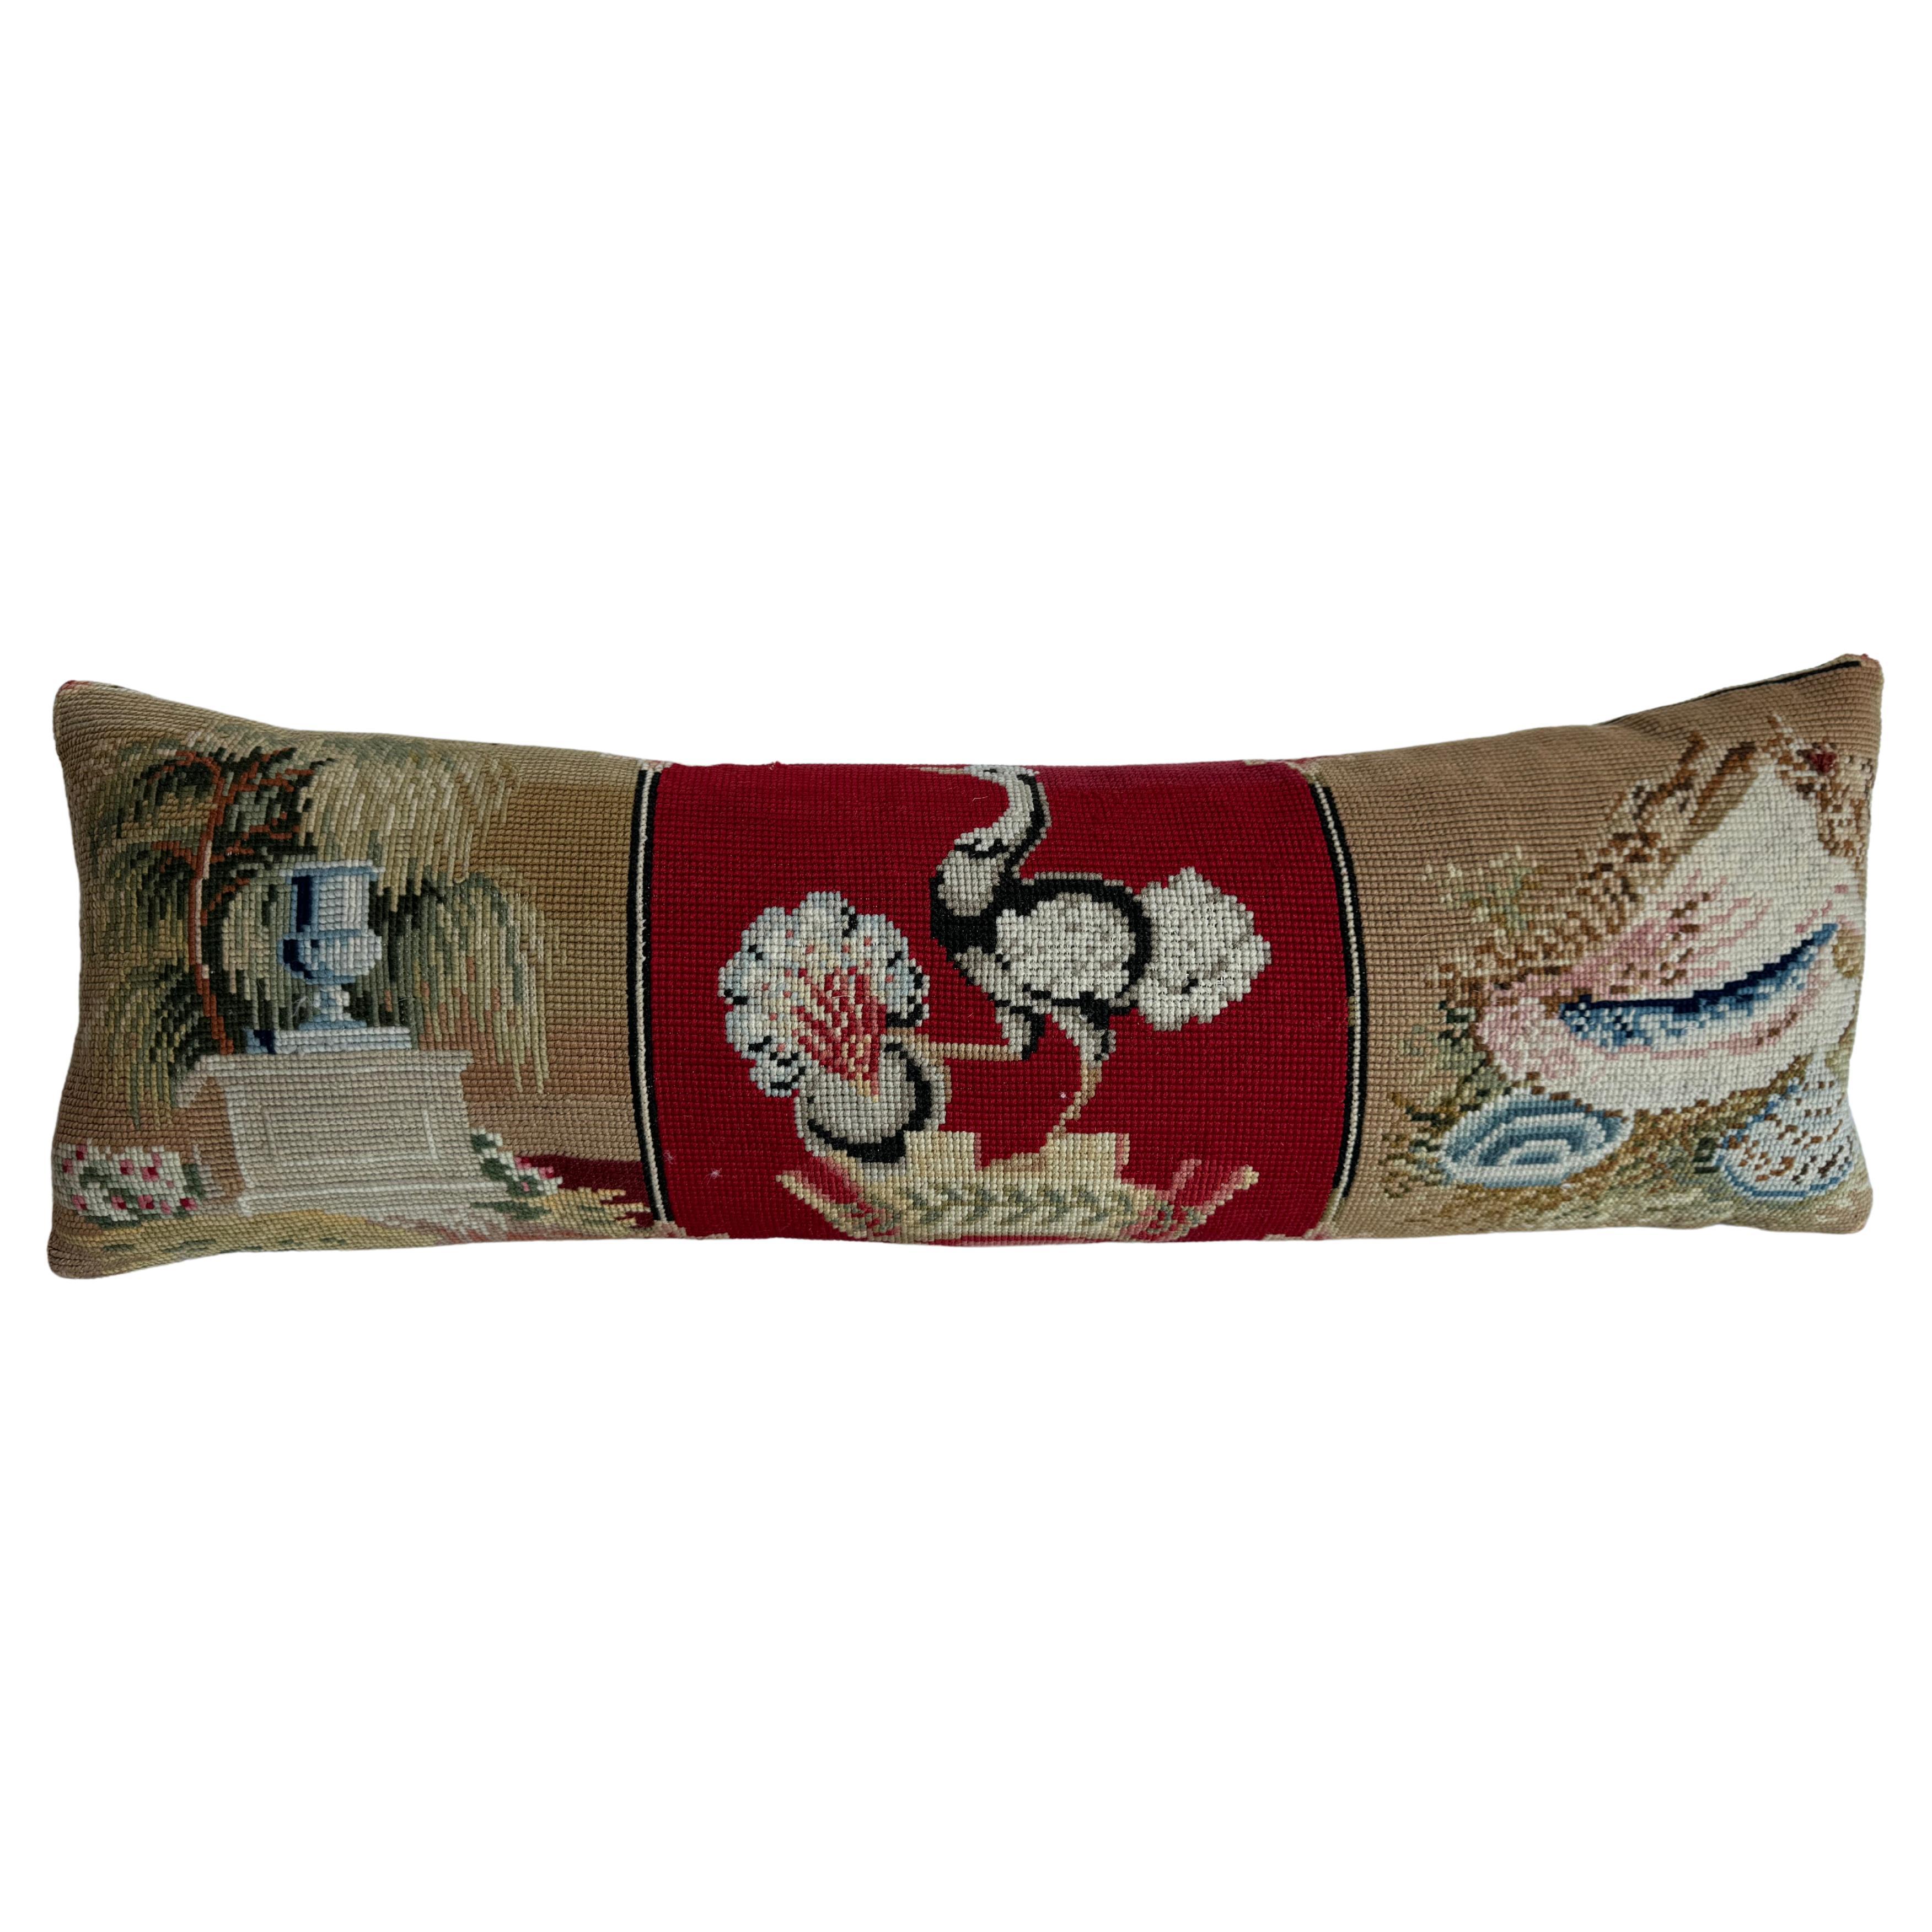 1850 English Needle Work Pillow - 23"X8" For Sale